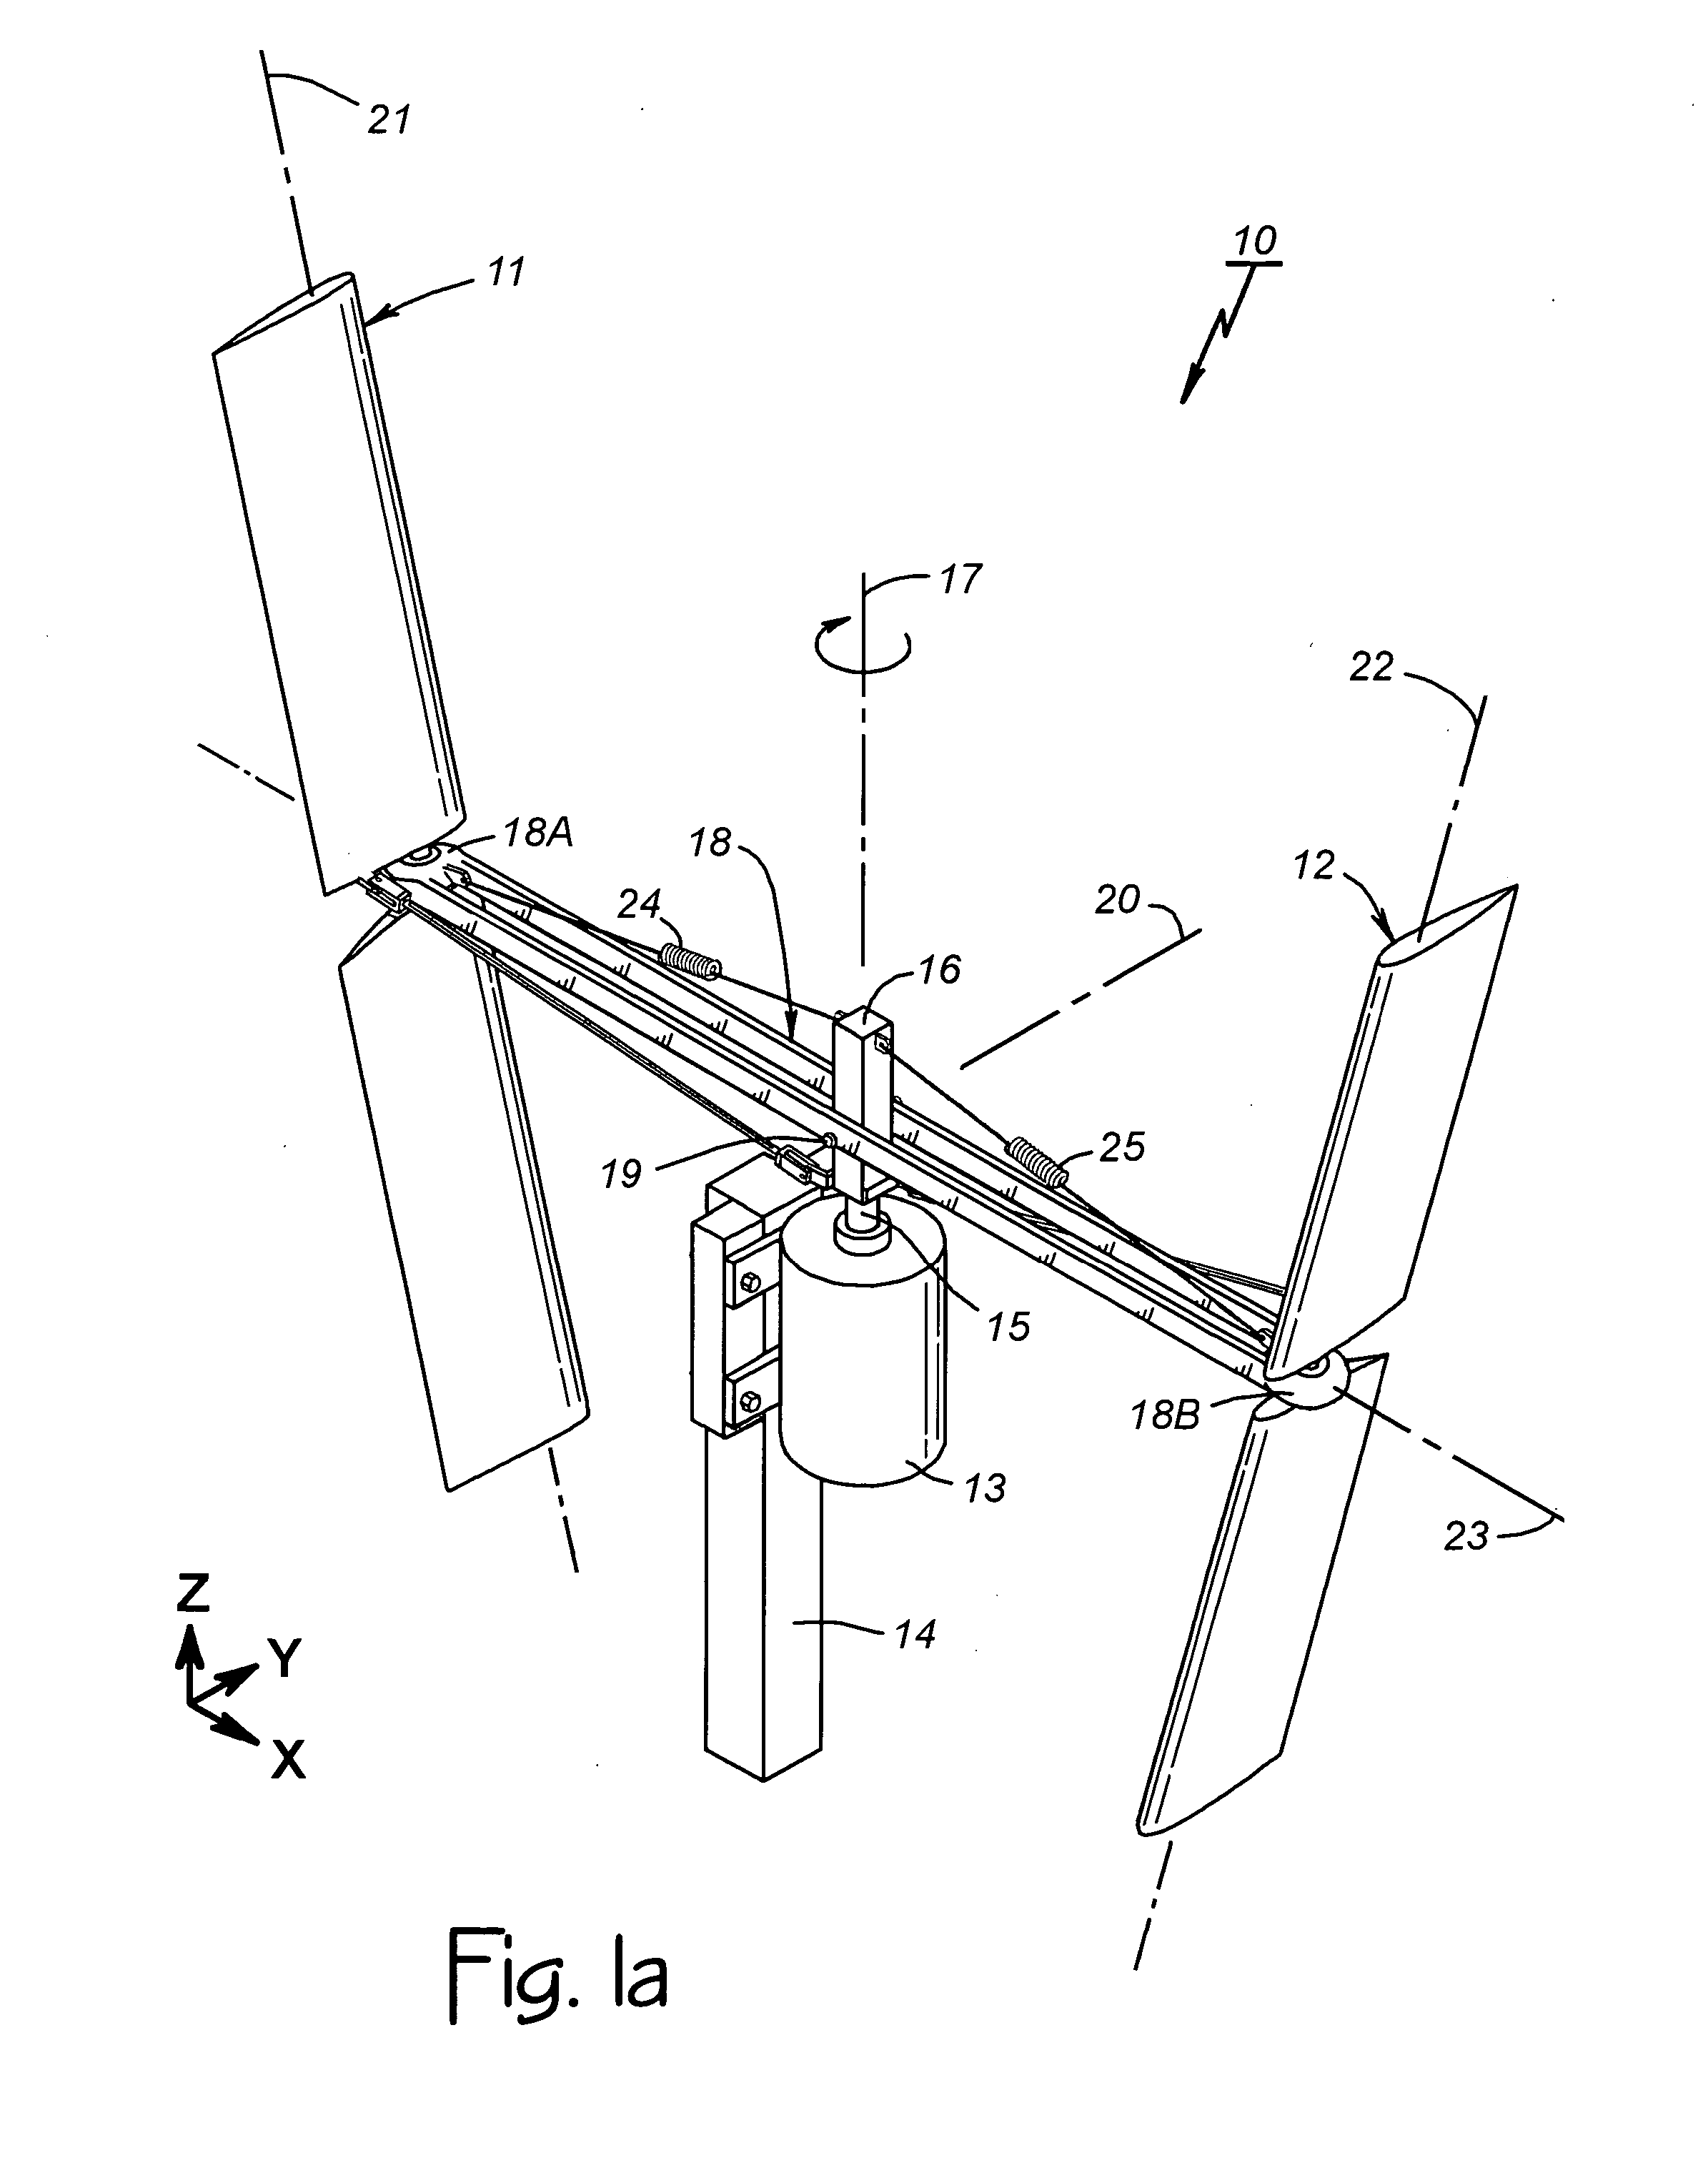 Vertical axis wind turbine with articulating rotor